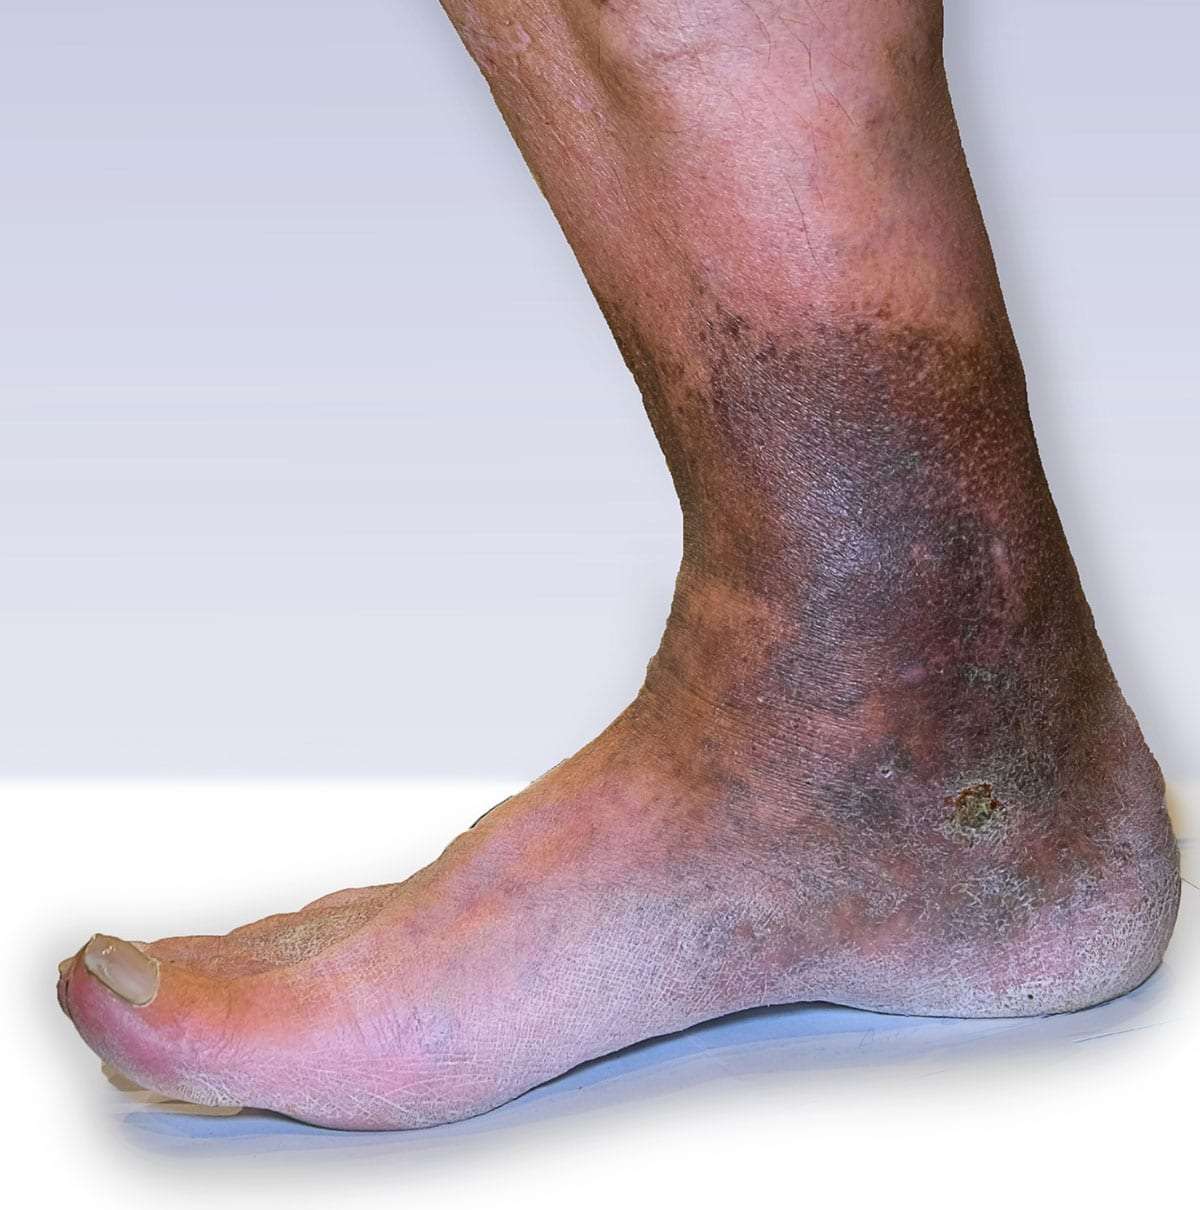 venous stasis foot swelling